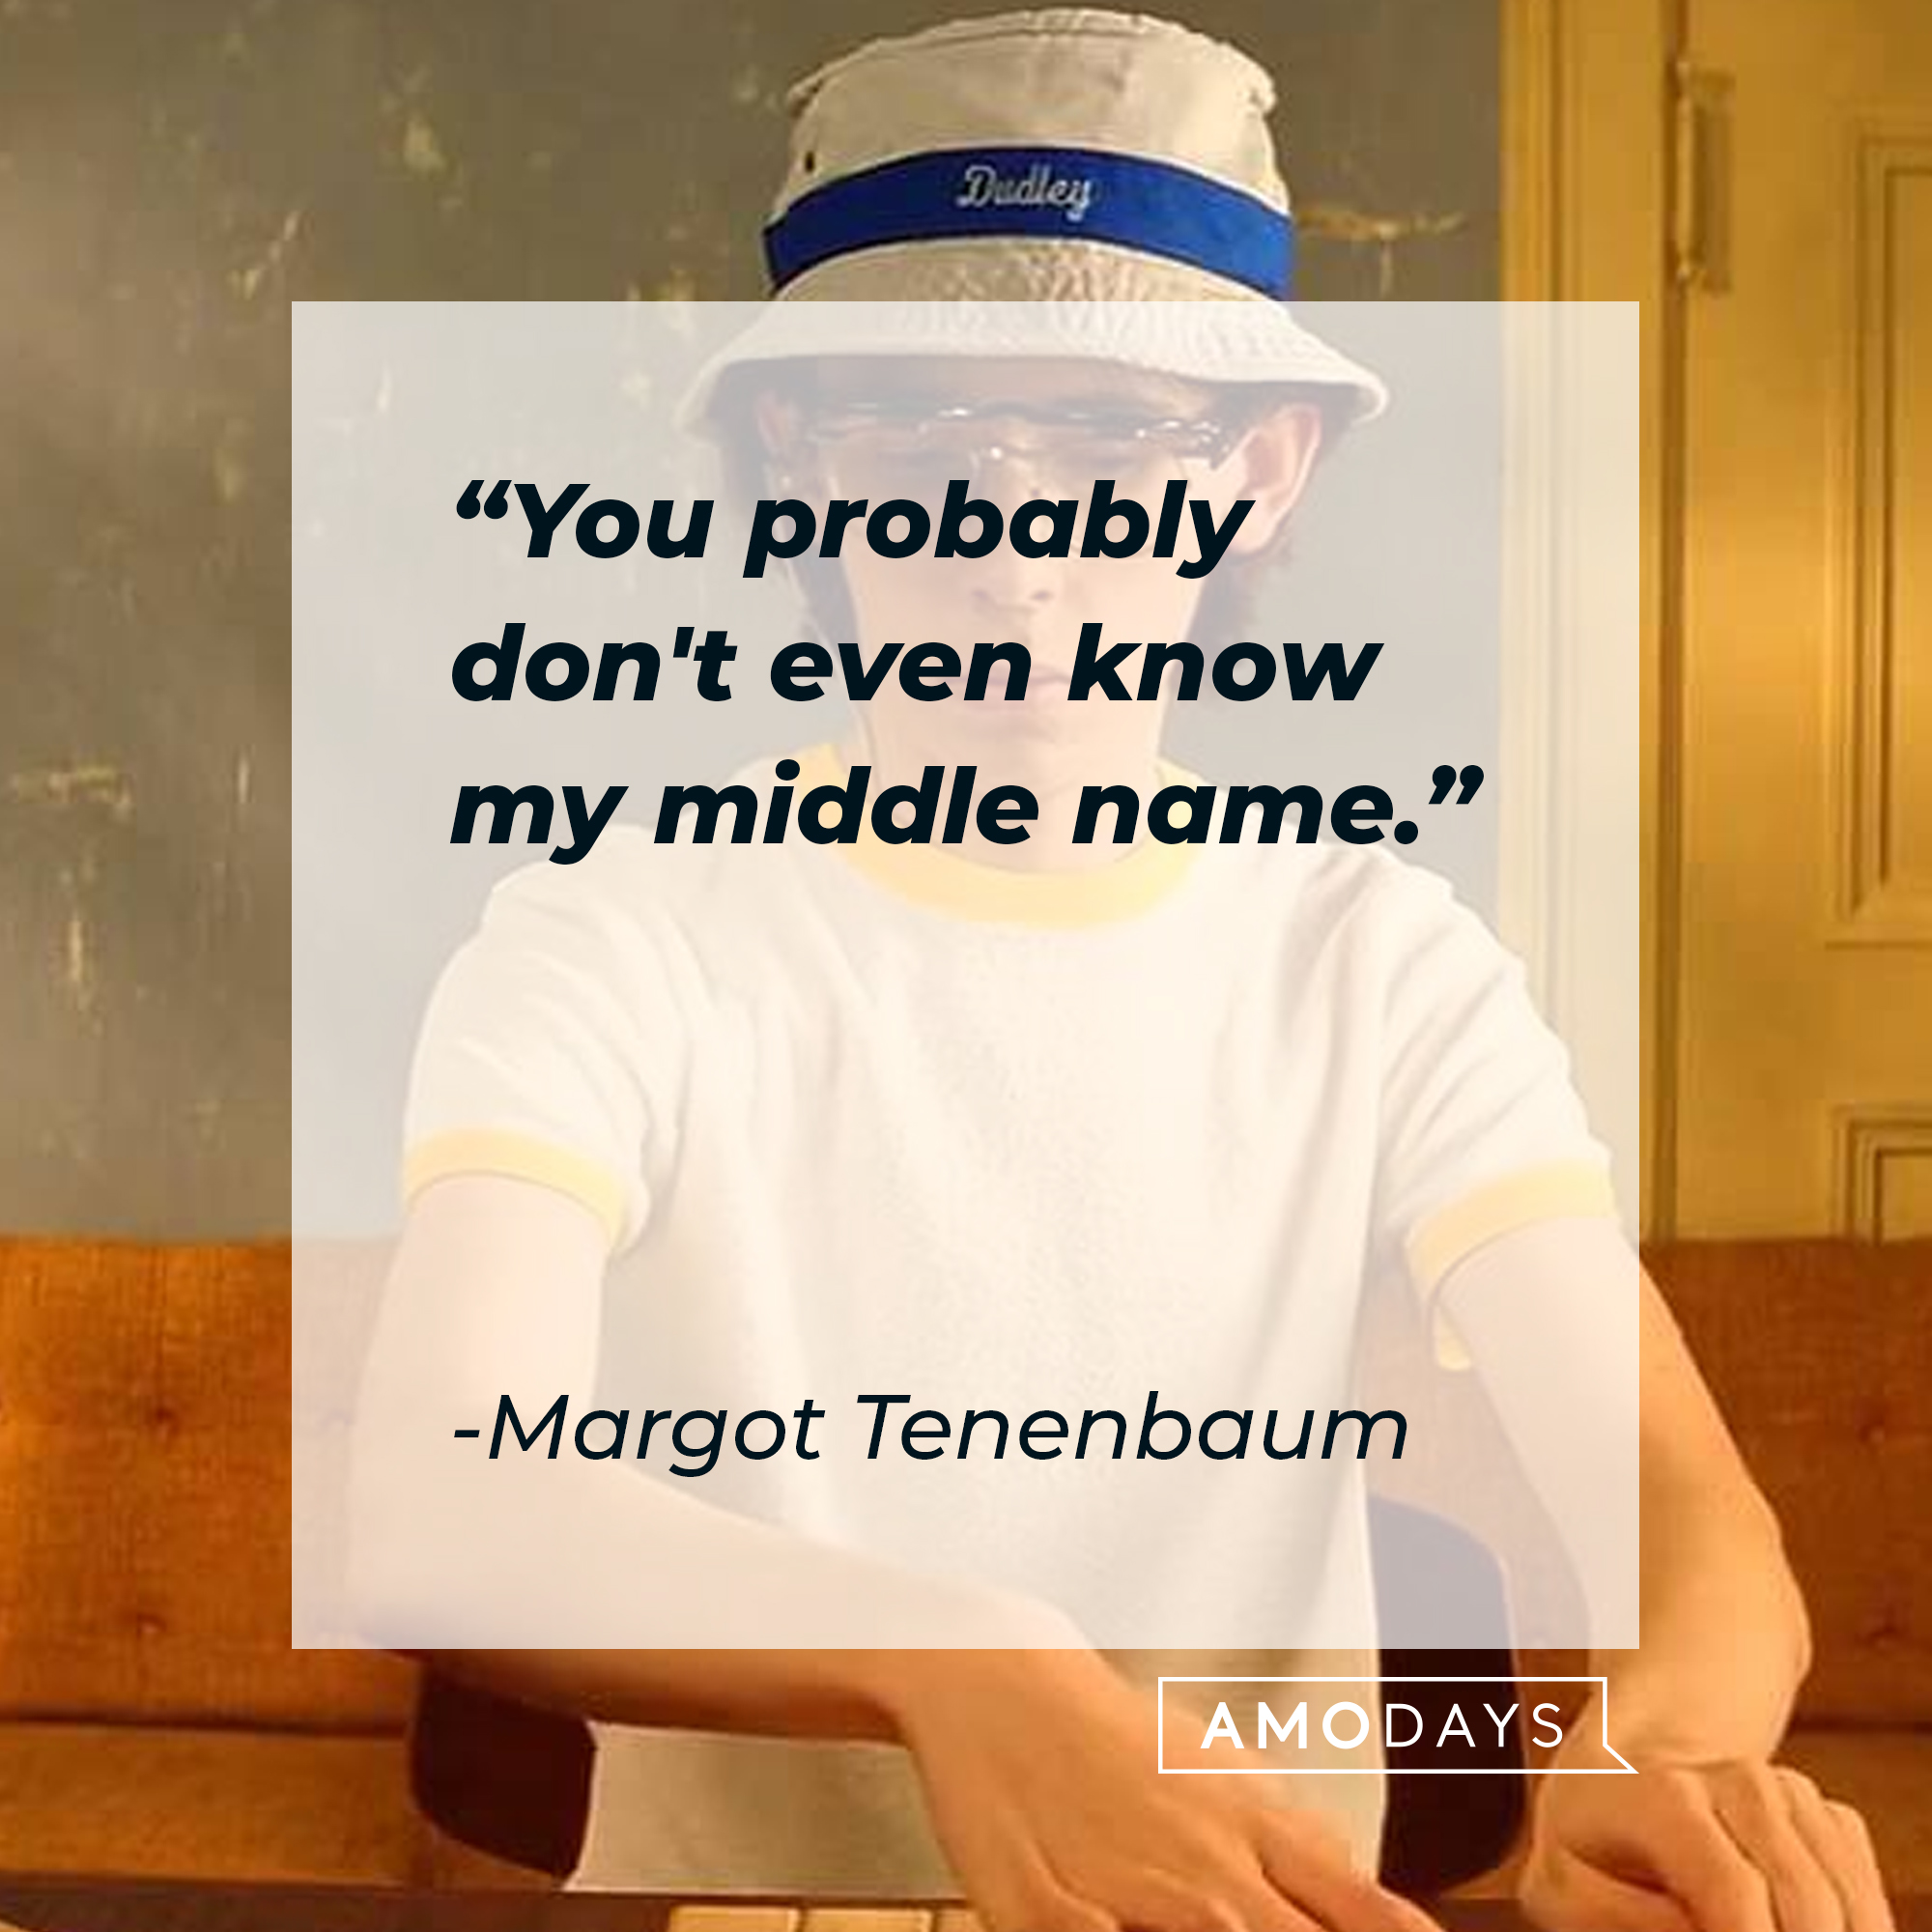 Margot Tenenbaum's quote: "You probably don't even know my middle name." | Image: AmoDays